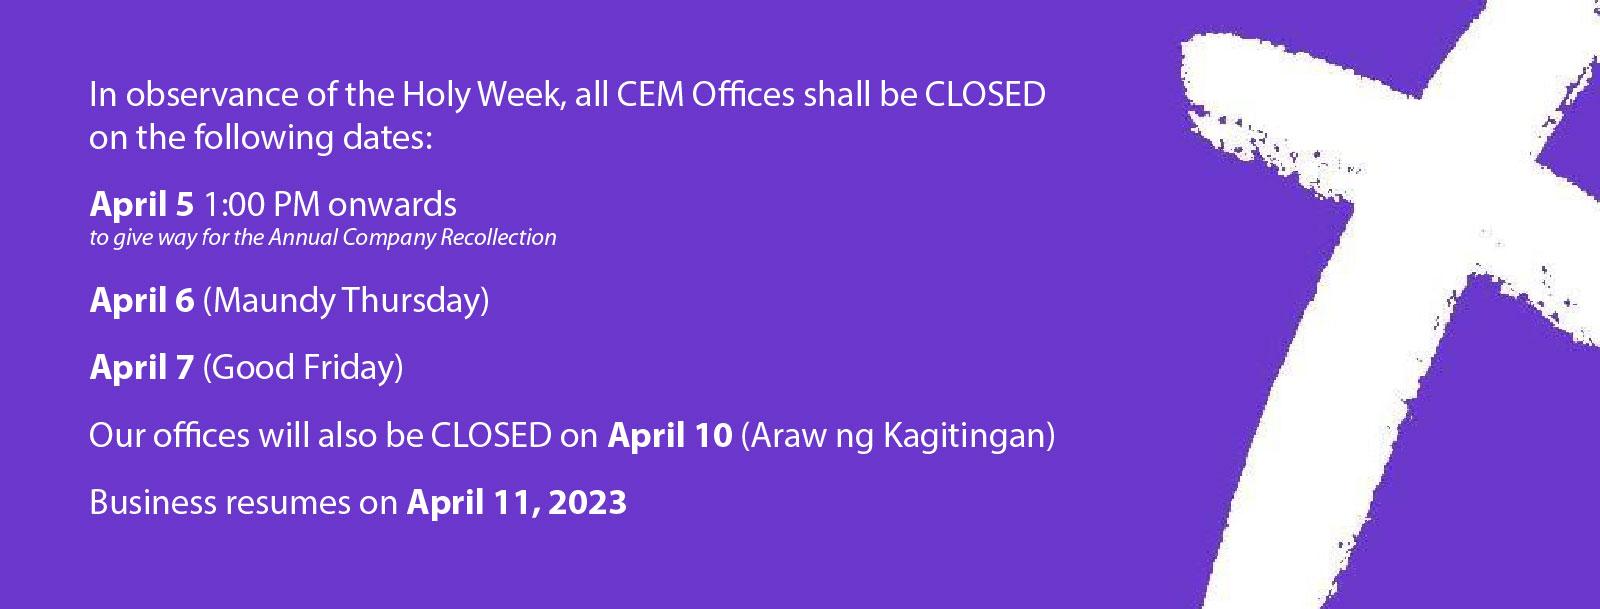 Important Notice - Offices Closed for 2023 Lent & Araw ng Kagitingan